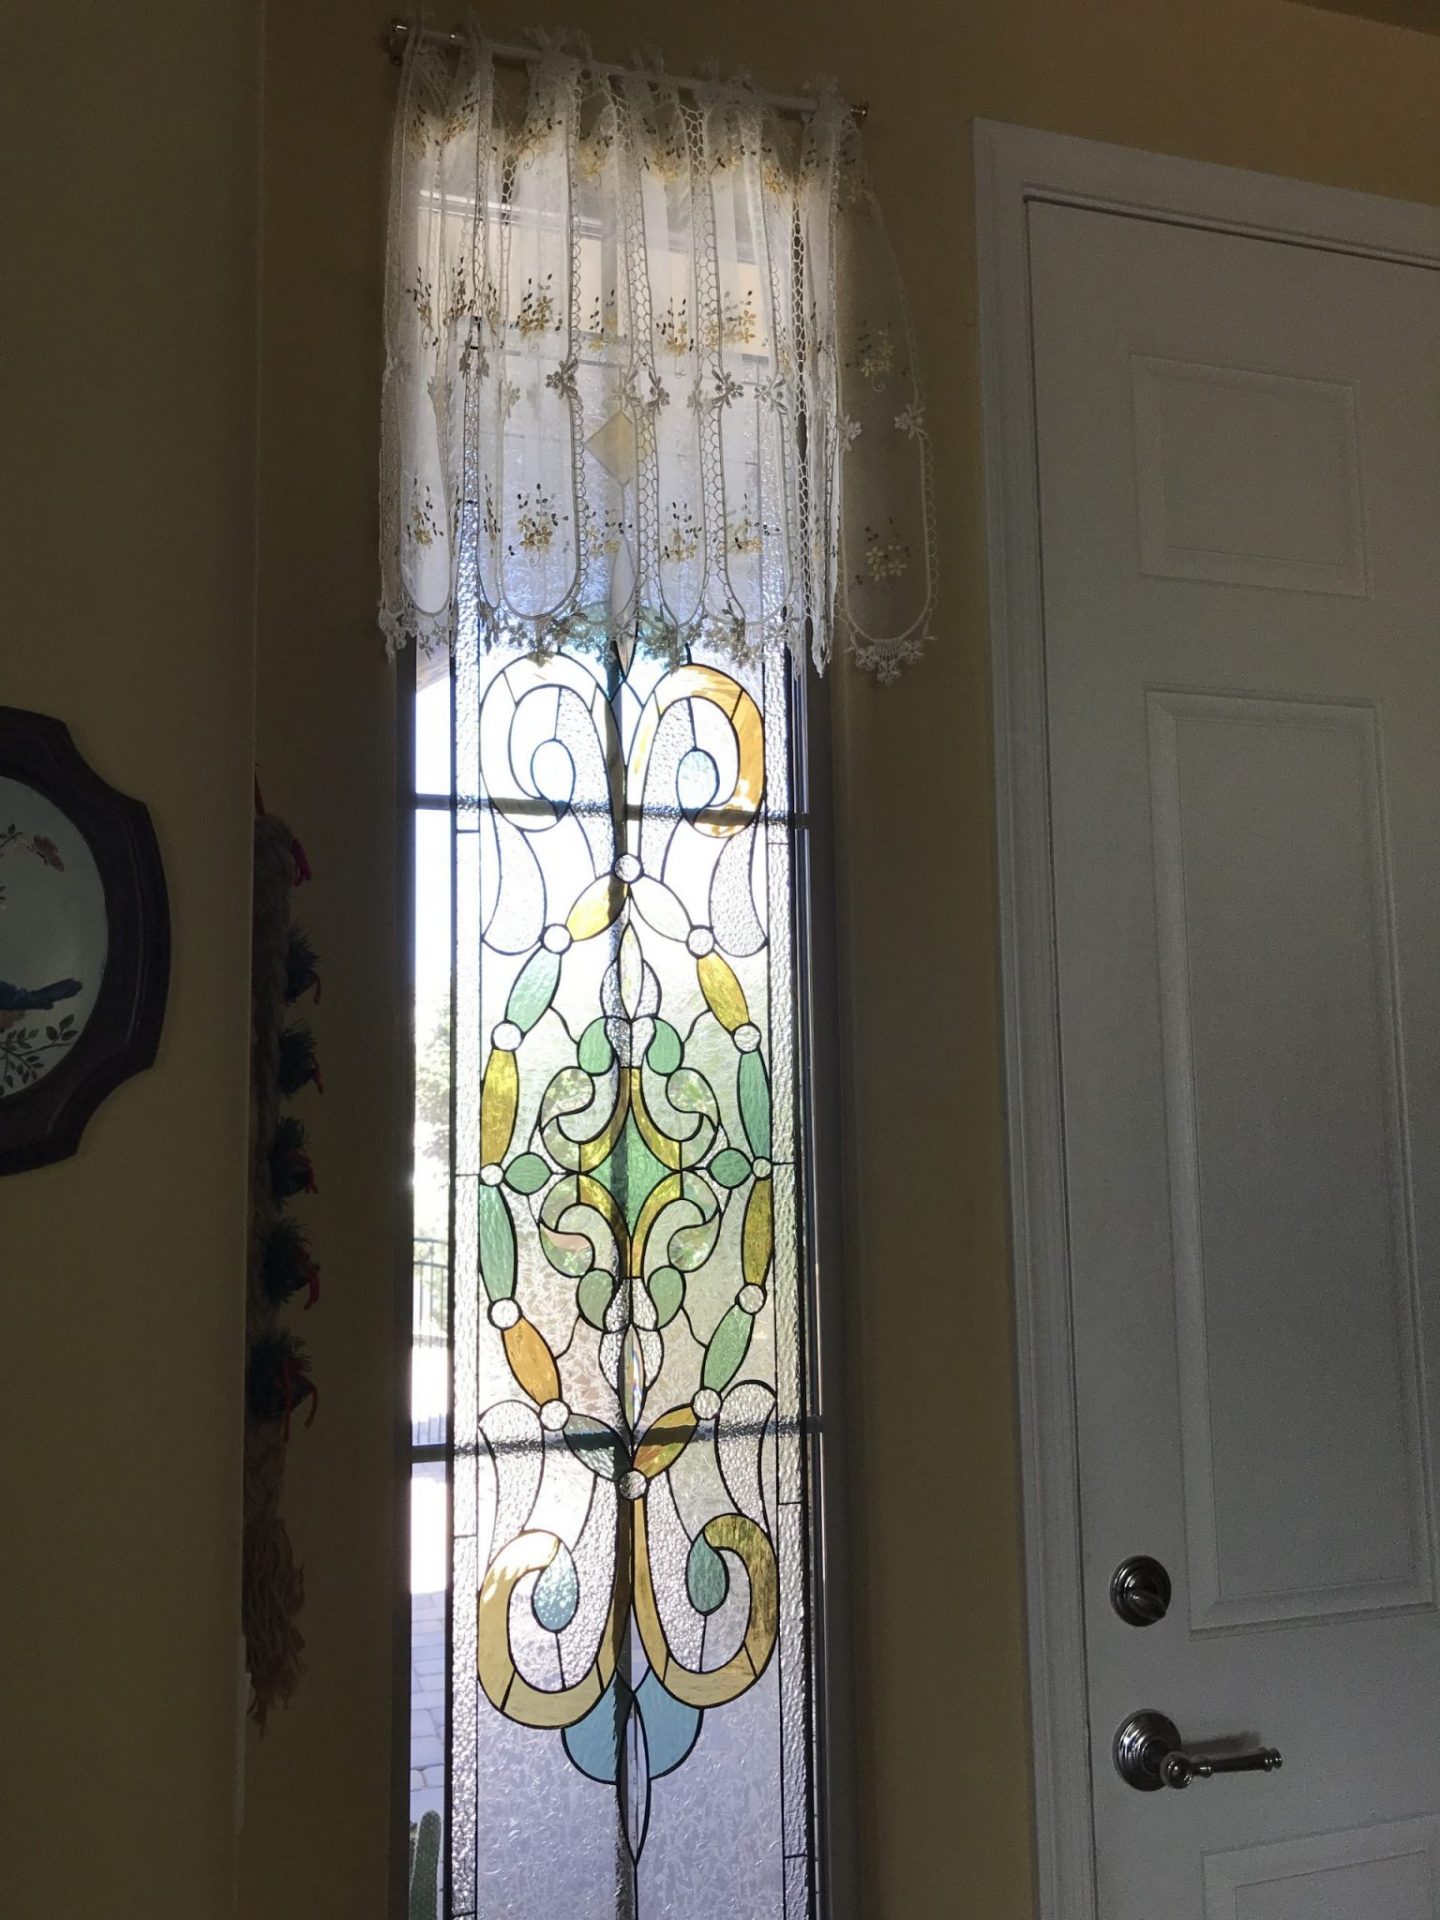 Victorian Stained Glass Window Set Against Existing Window With Grid System